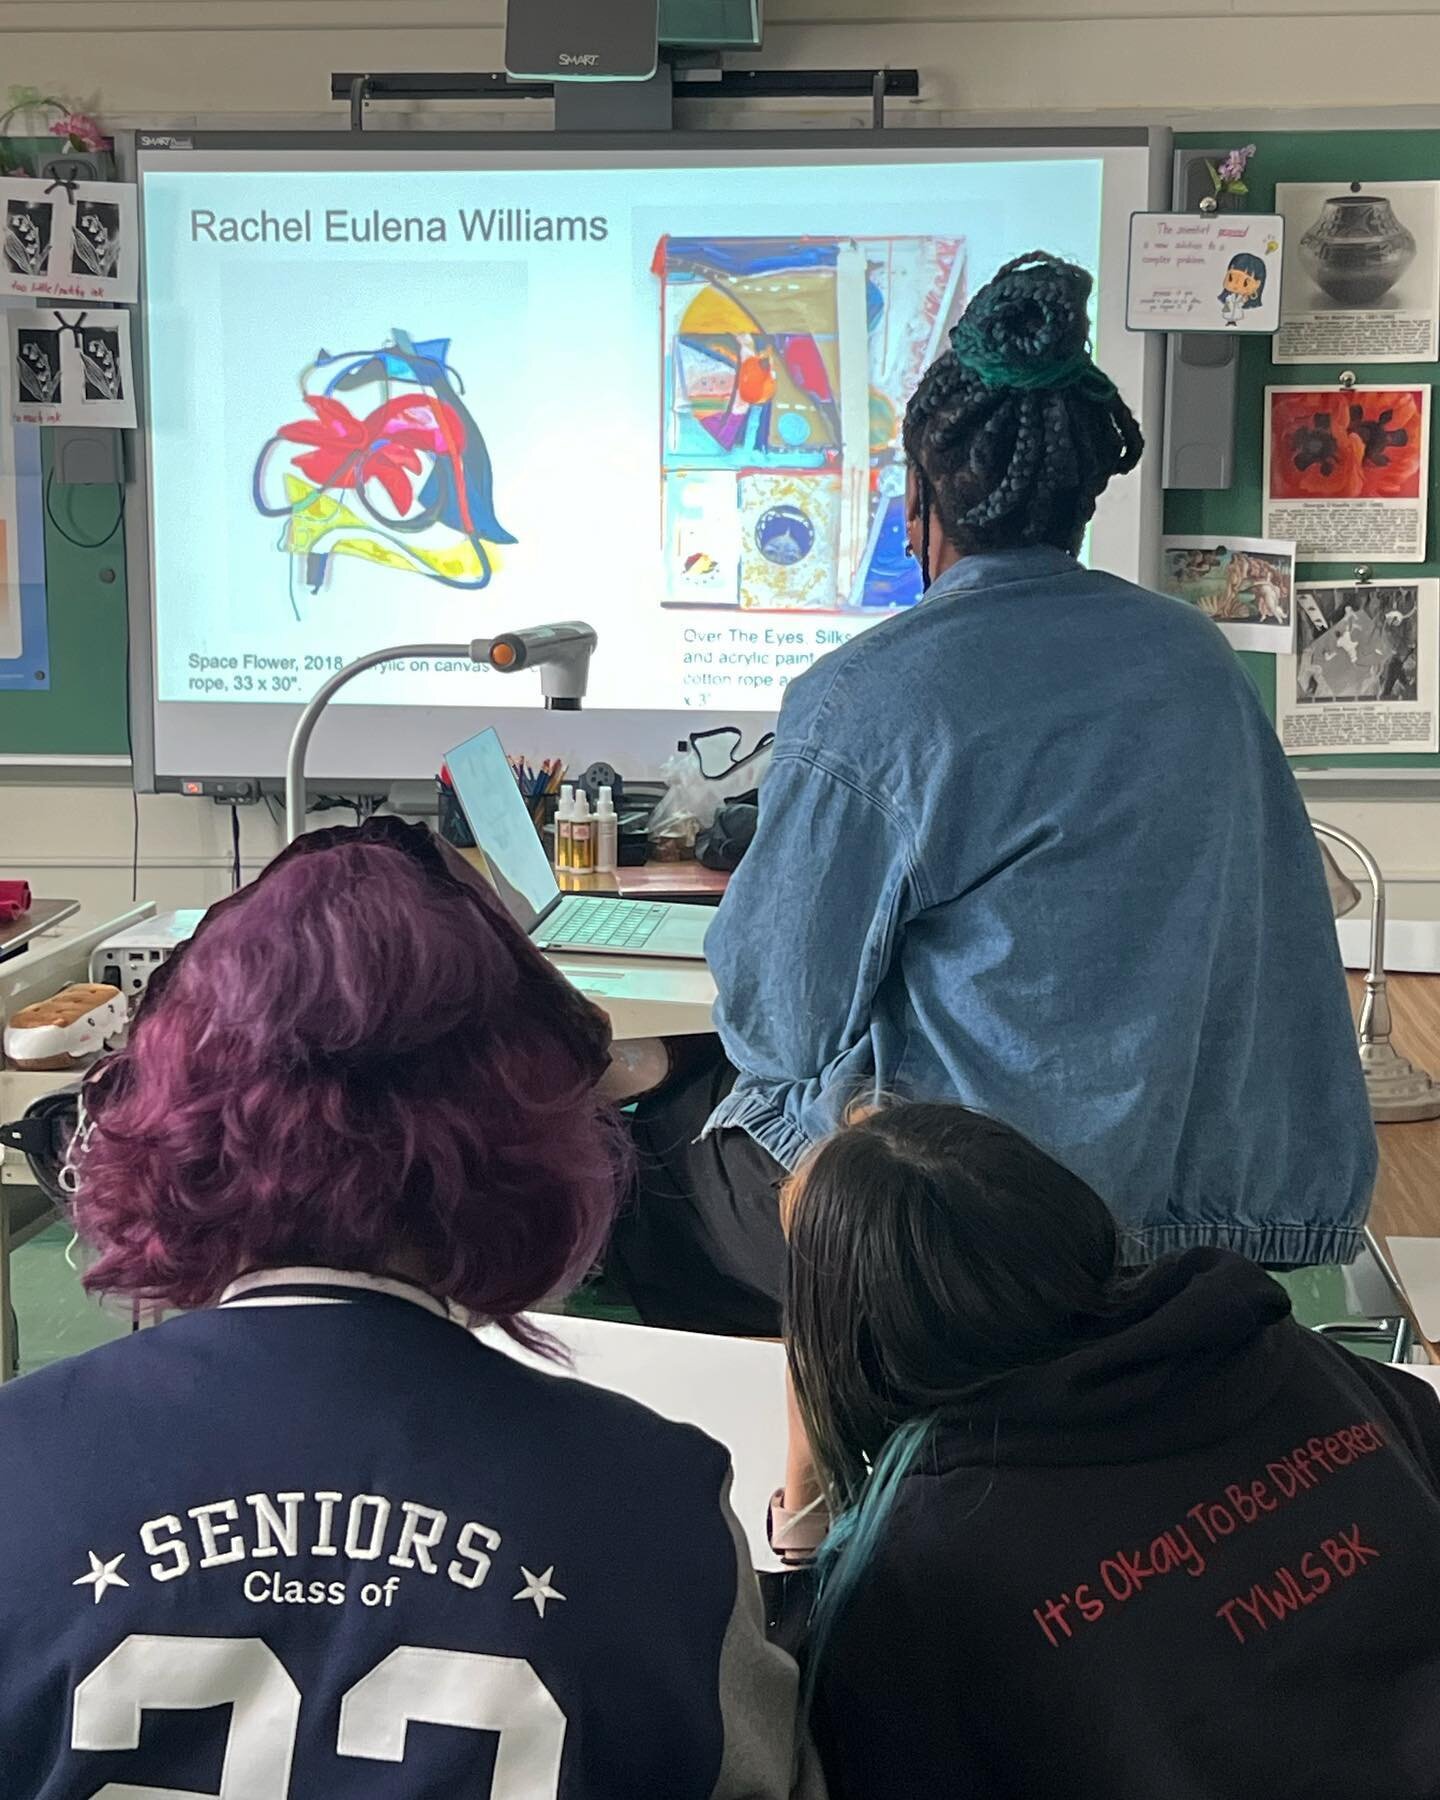 We were so happy to continue our first Wide Rainbow micro artist residency with Brooklyn based artist Rachel Eulena Williams ( @rae_eulena ) and The Young Women&rsquo;s Leadership School of Brooklyn ( @twylsbrooklynofficial ) last week on TWYLS&rsquo